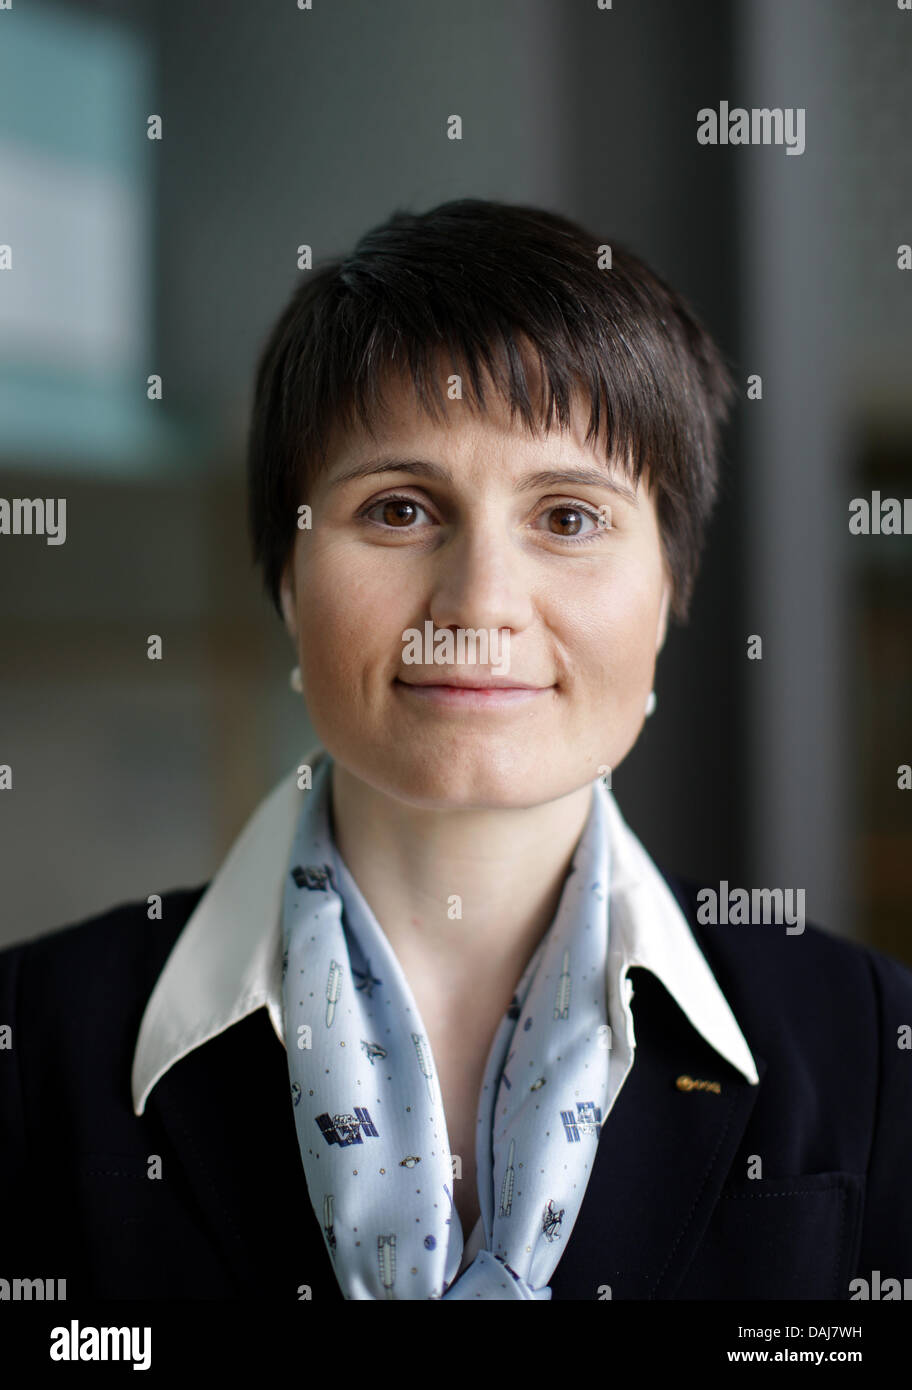 Italian ESA-astronaut Samantha Cristoforetti is pictured at the World Conference Centre in Bonn, Germany, 24 March 2011. The German Aerospace Centre and the European Space Agency ESA strike a balance after ten years of scientific research with the International Space Station ISS. Photo: Rolf Vennenbernd Stock Photo